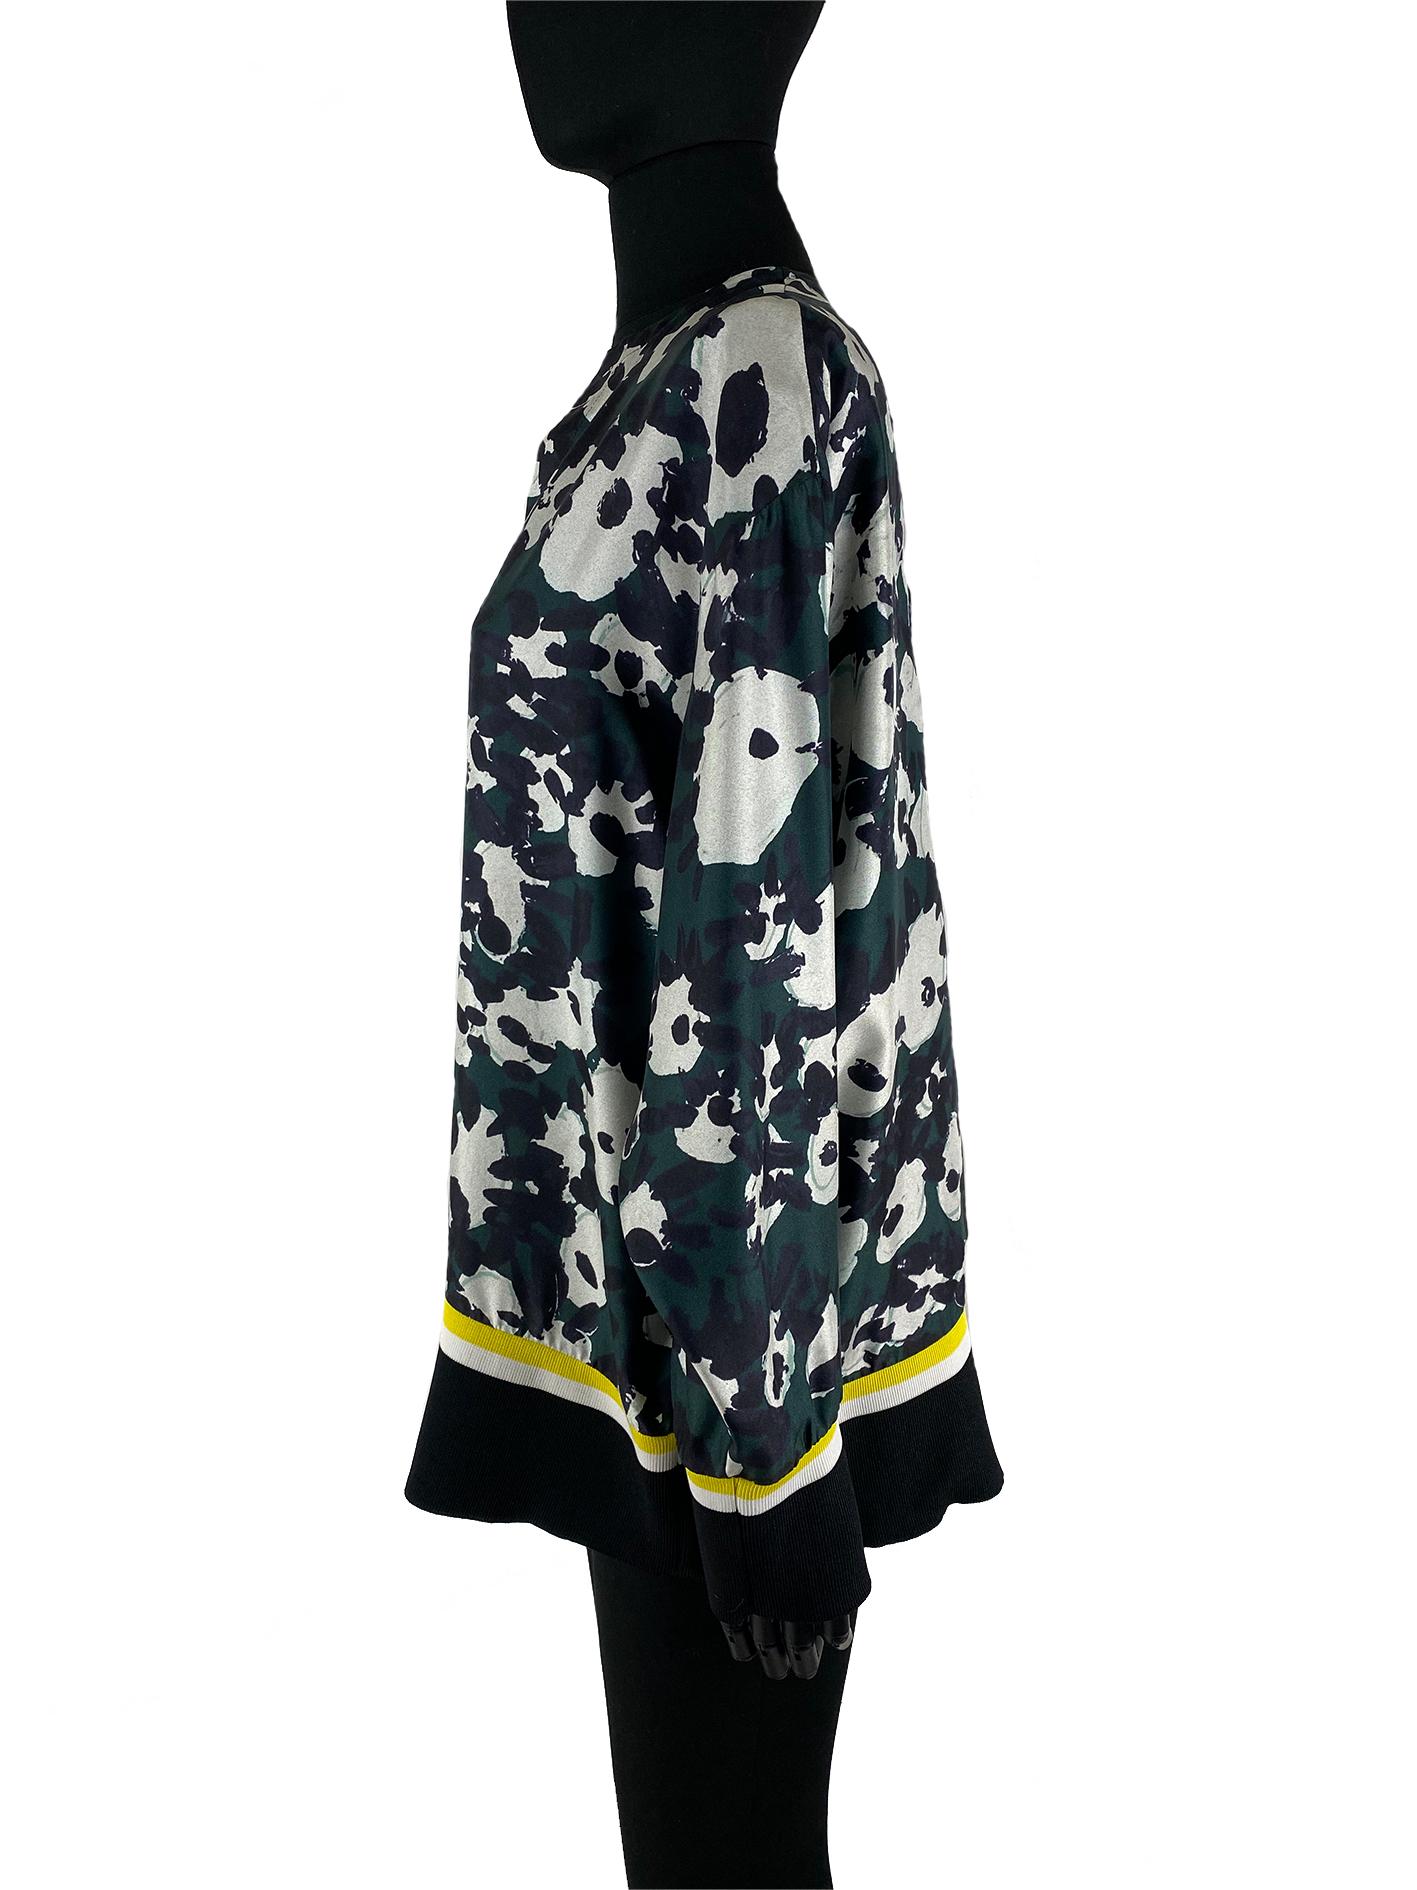 A camo print Marni top with shades of forest green, white and black. The top features an elasticated waistband and cuffs with yellow, white and black around the length of them in horizontal stripes. The collar of the top goes into a sharp ‘V’. The